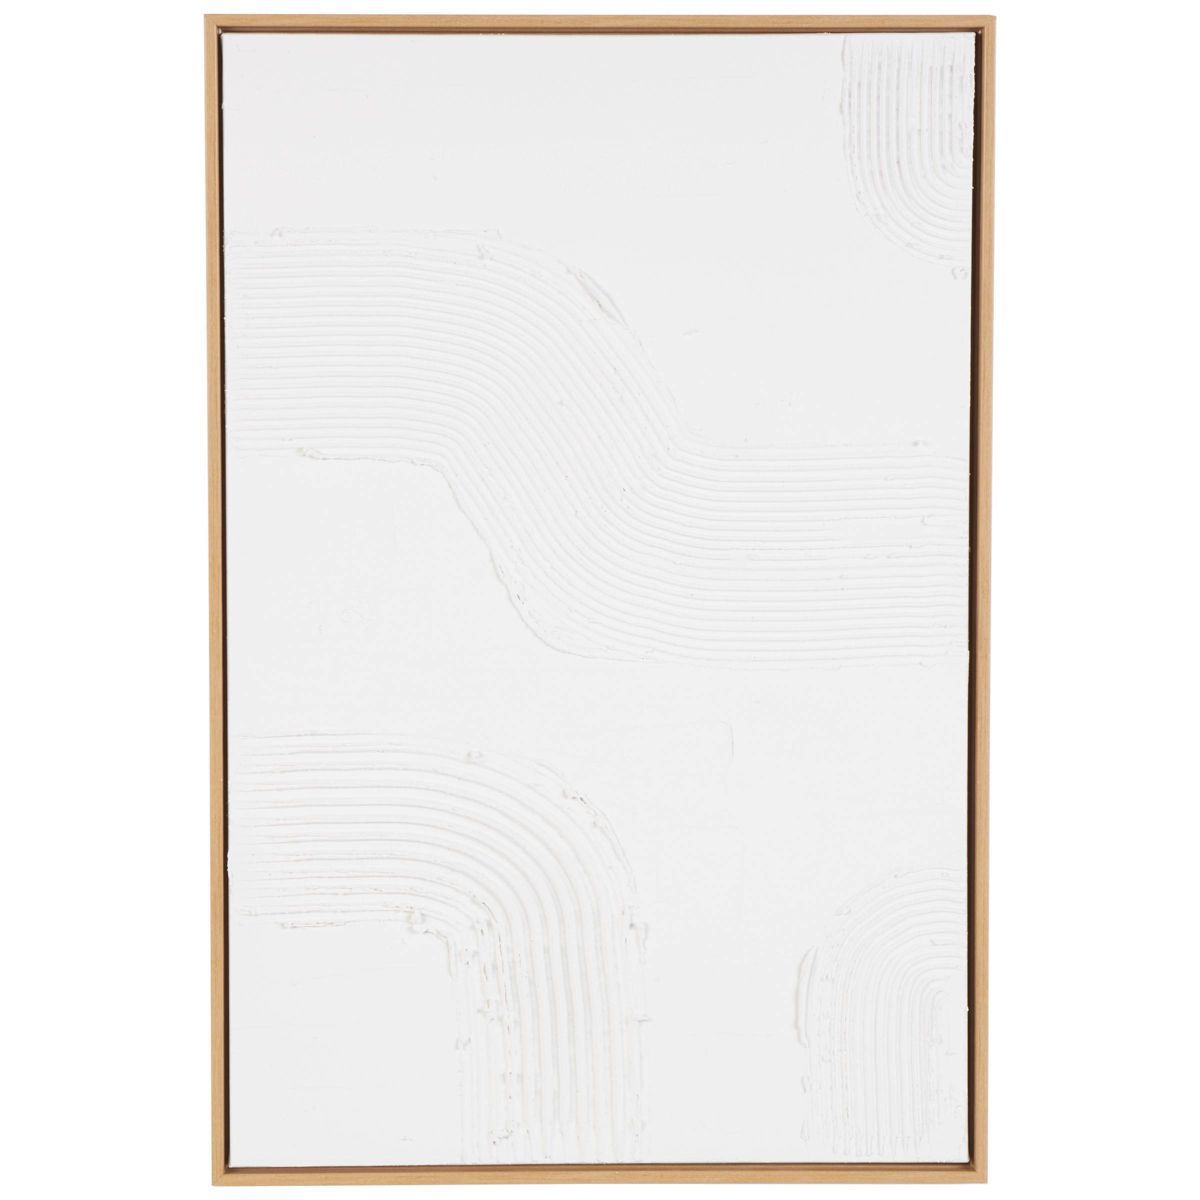 Olivia & May 36"x24" Canvas Abstract Framed Wall Art with Frame Brown/White | Target